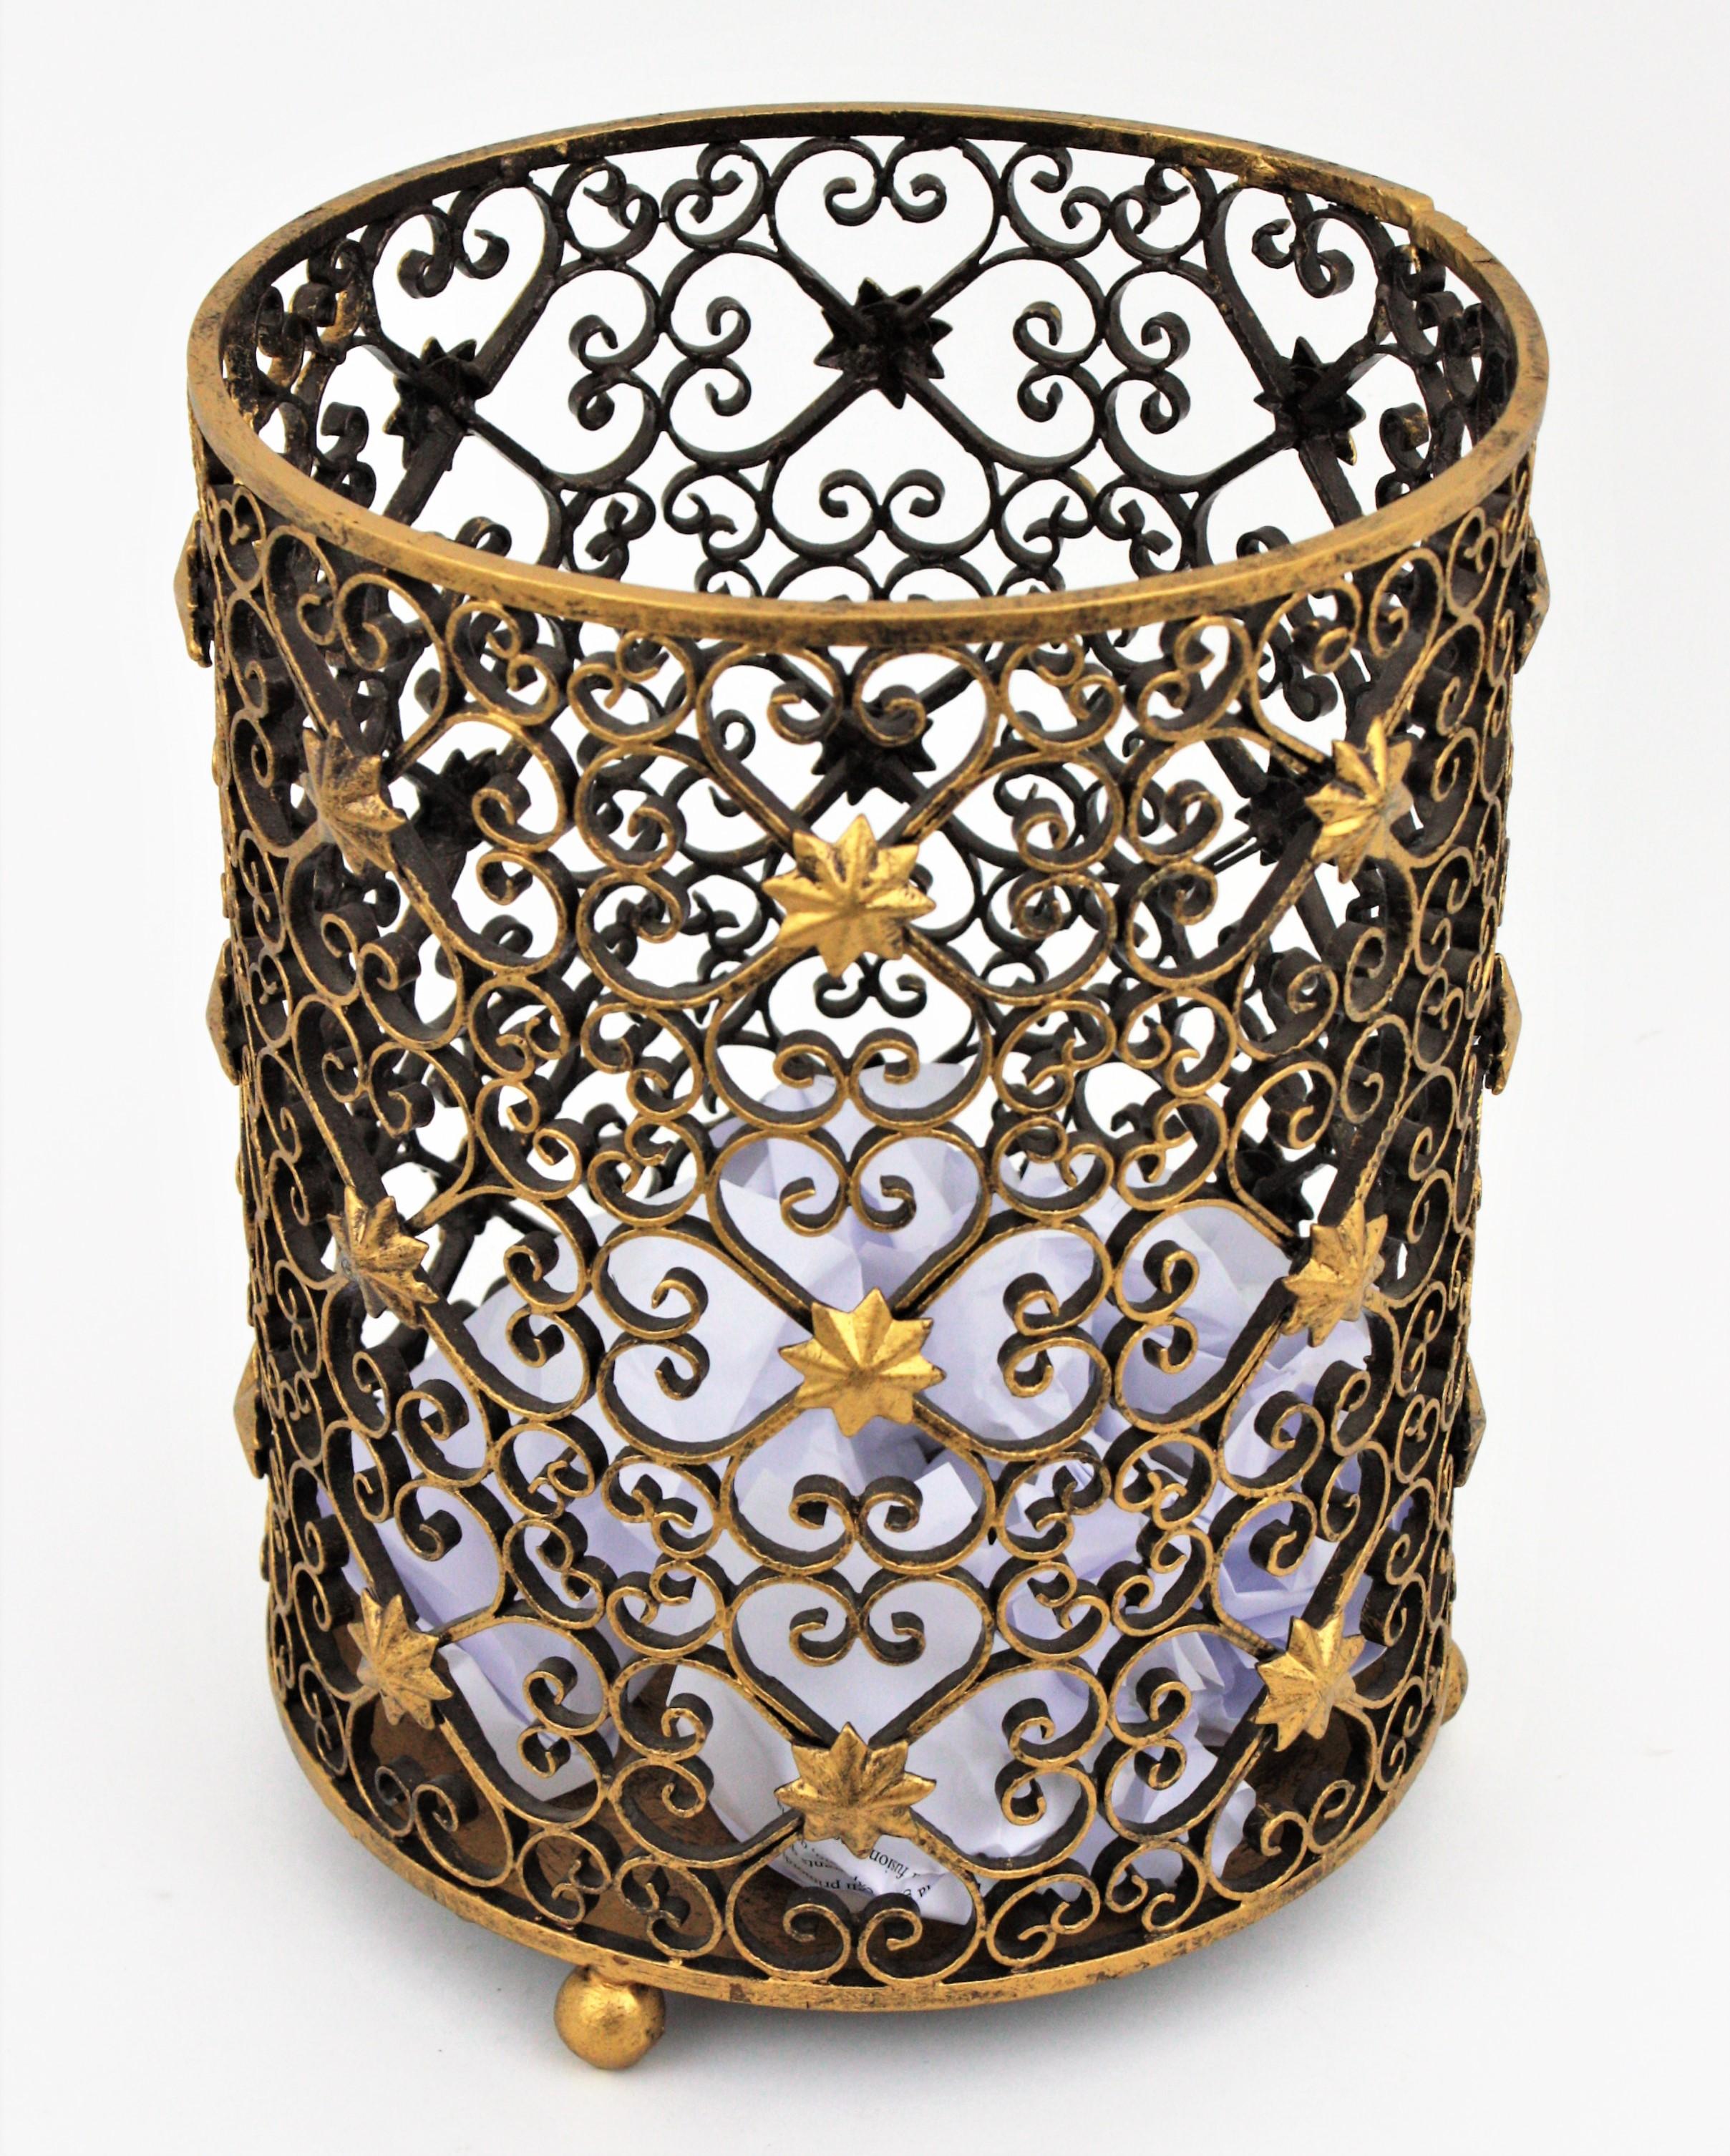 Outstanding handwrought iron waste basket with scrollwork and stars detailings, France, 1940s.
This waste basket stands up on three ball shaped feet. All the structure is heavily decorated with hand-hammered iron scrolls accented by small stars